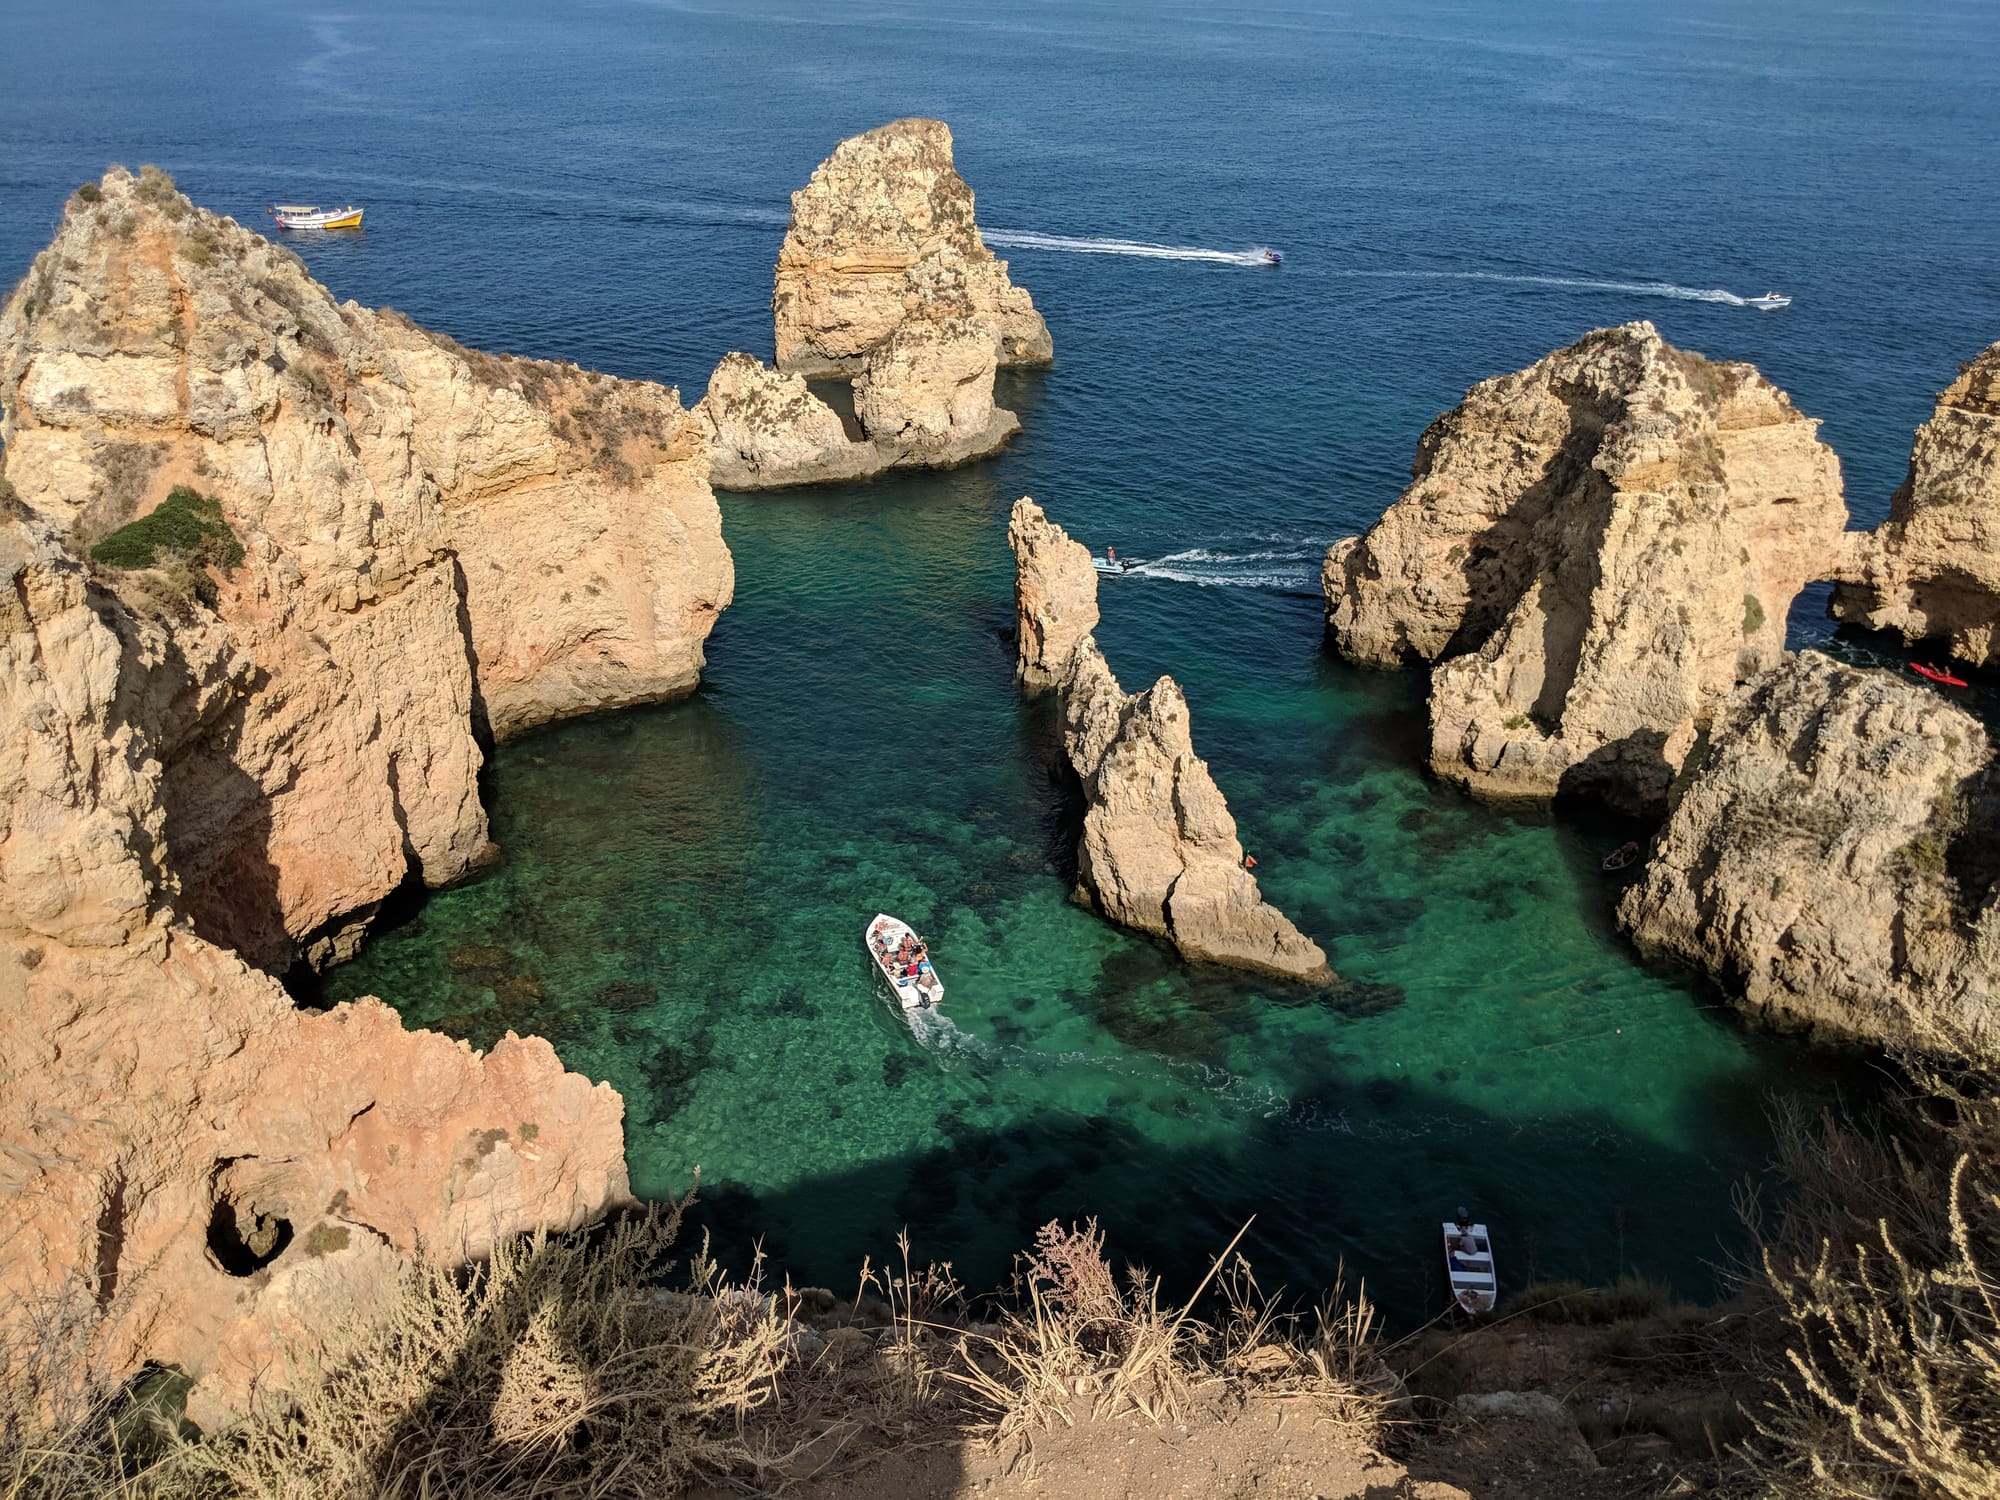 The Algarve in southern Portugal has some of the most amazing cliffs and water!